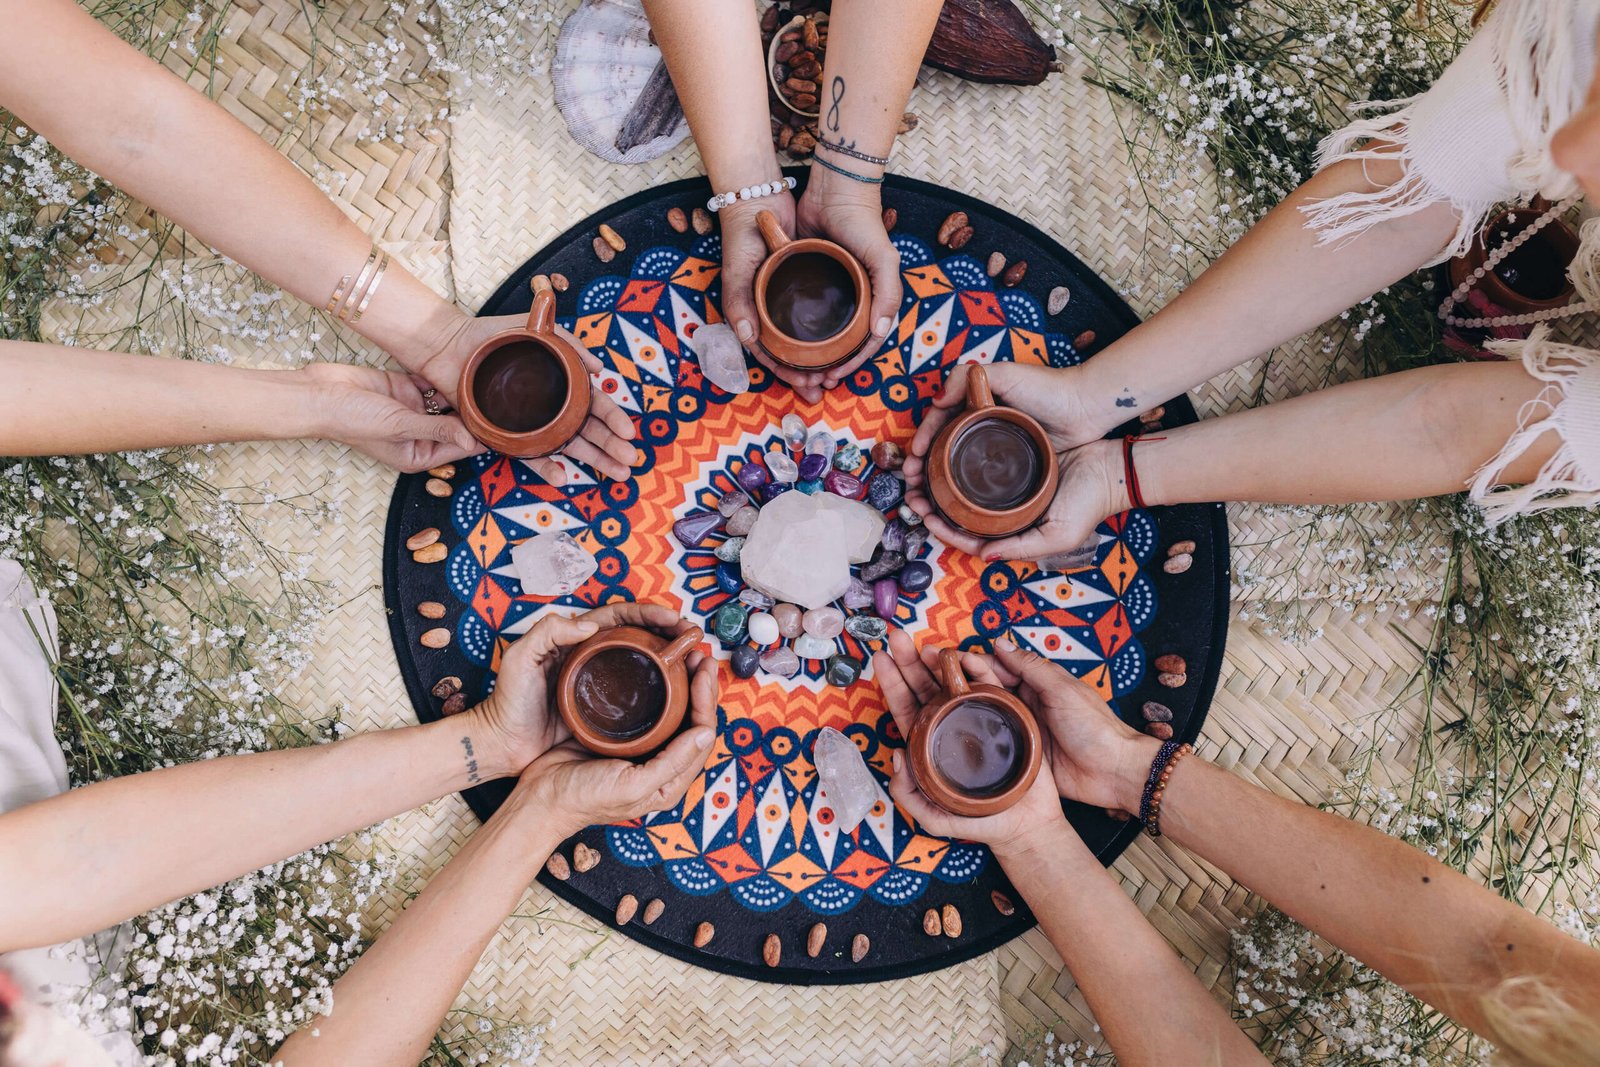 A group of women holding together their cups of cacoa during a cacao ceremony in show of sisterhood which is one of the benefits of retreats.